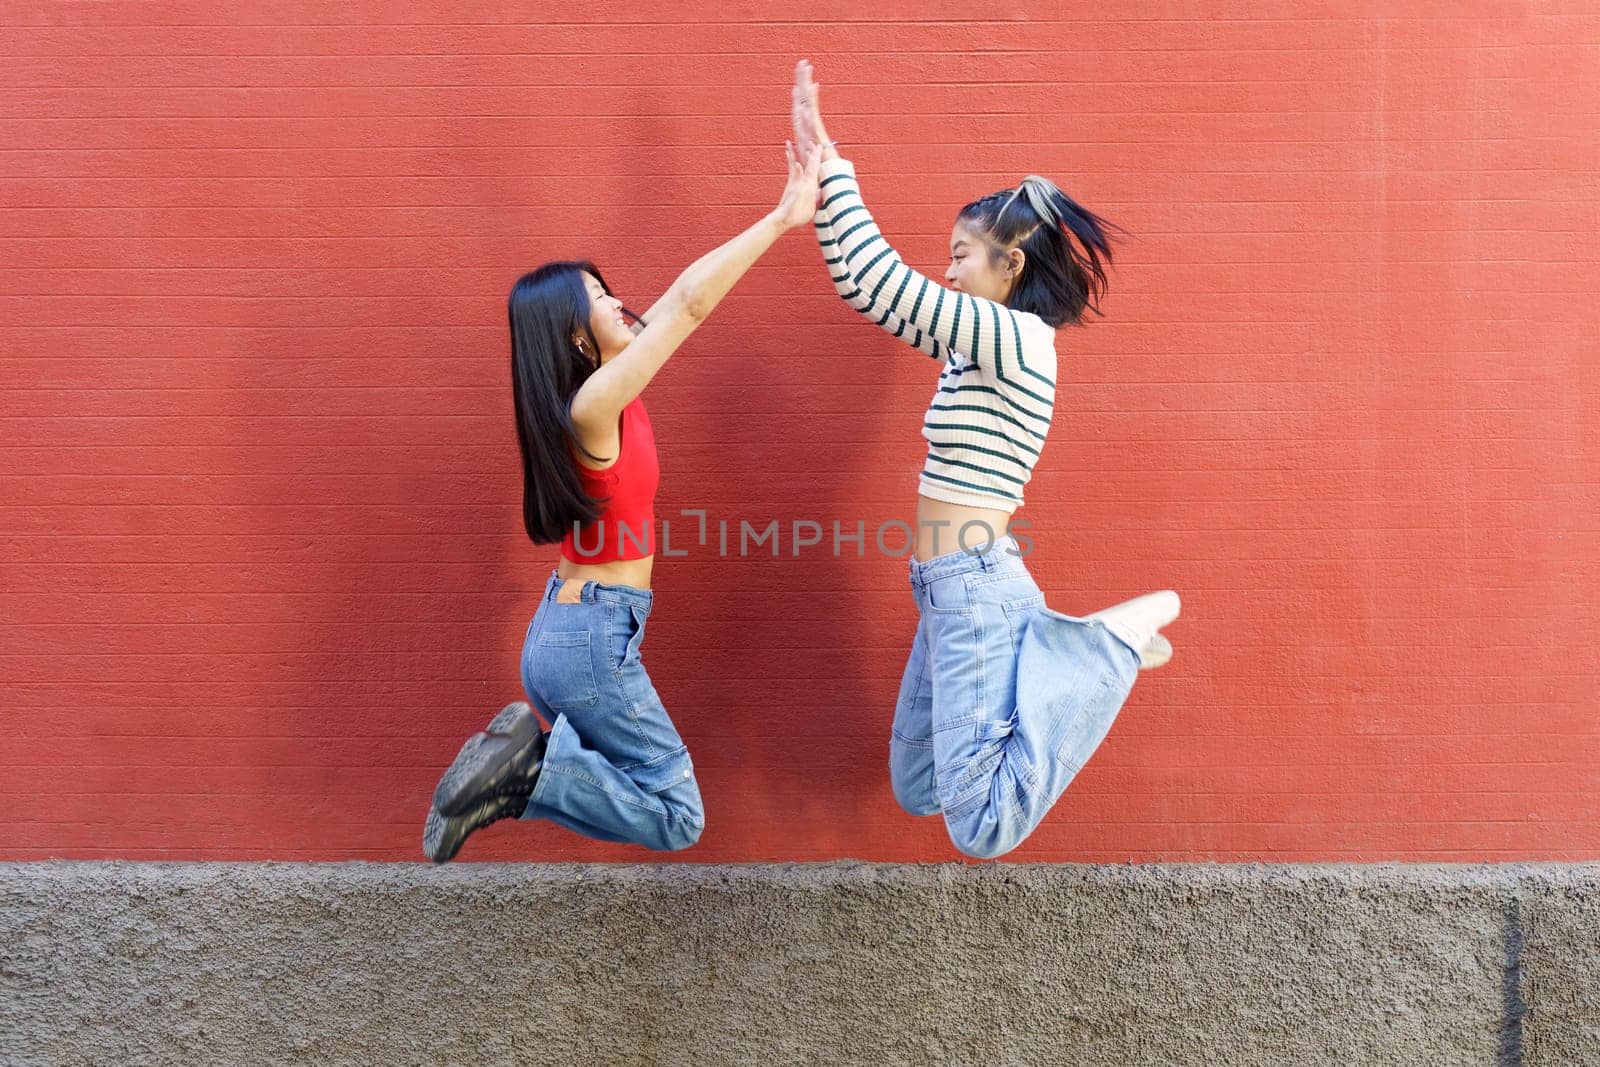 Full body side view of cheerful young Asian women friends jumping up and giving high five to each other against red wall